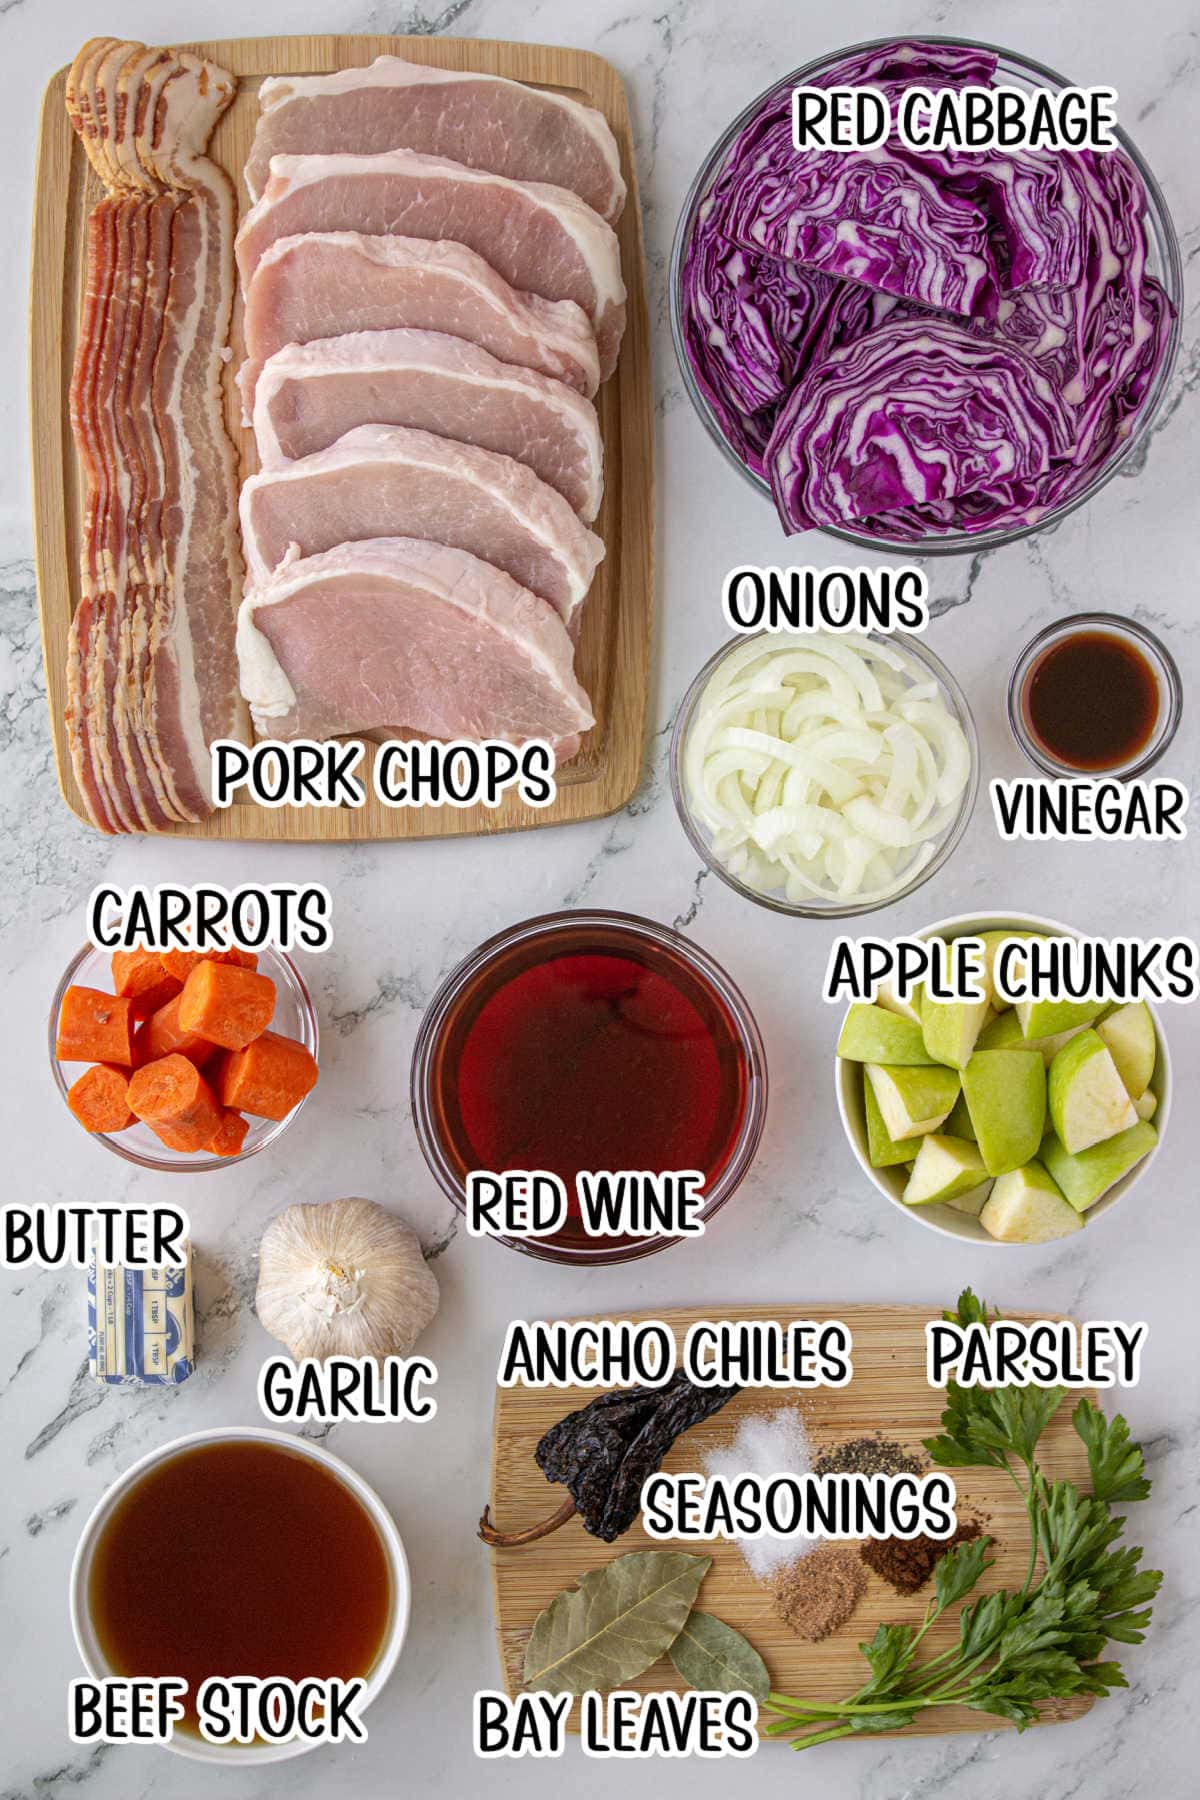 Ingredients list for Braised Pork and Red Cabbage